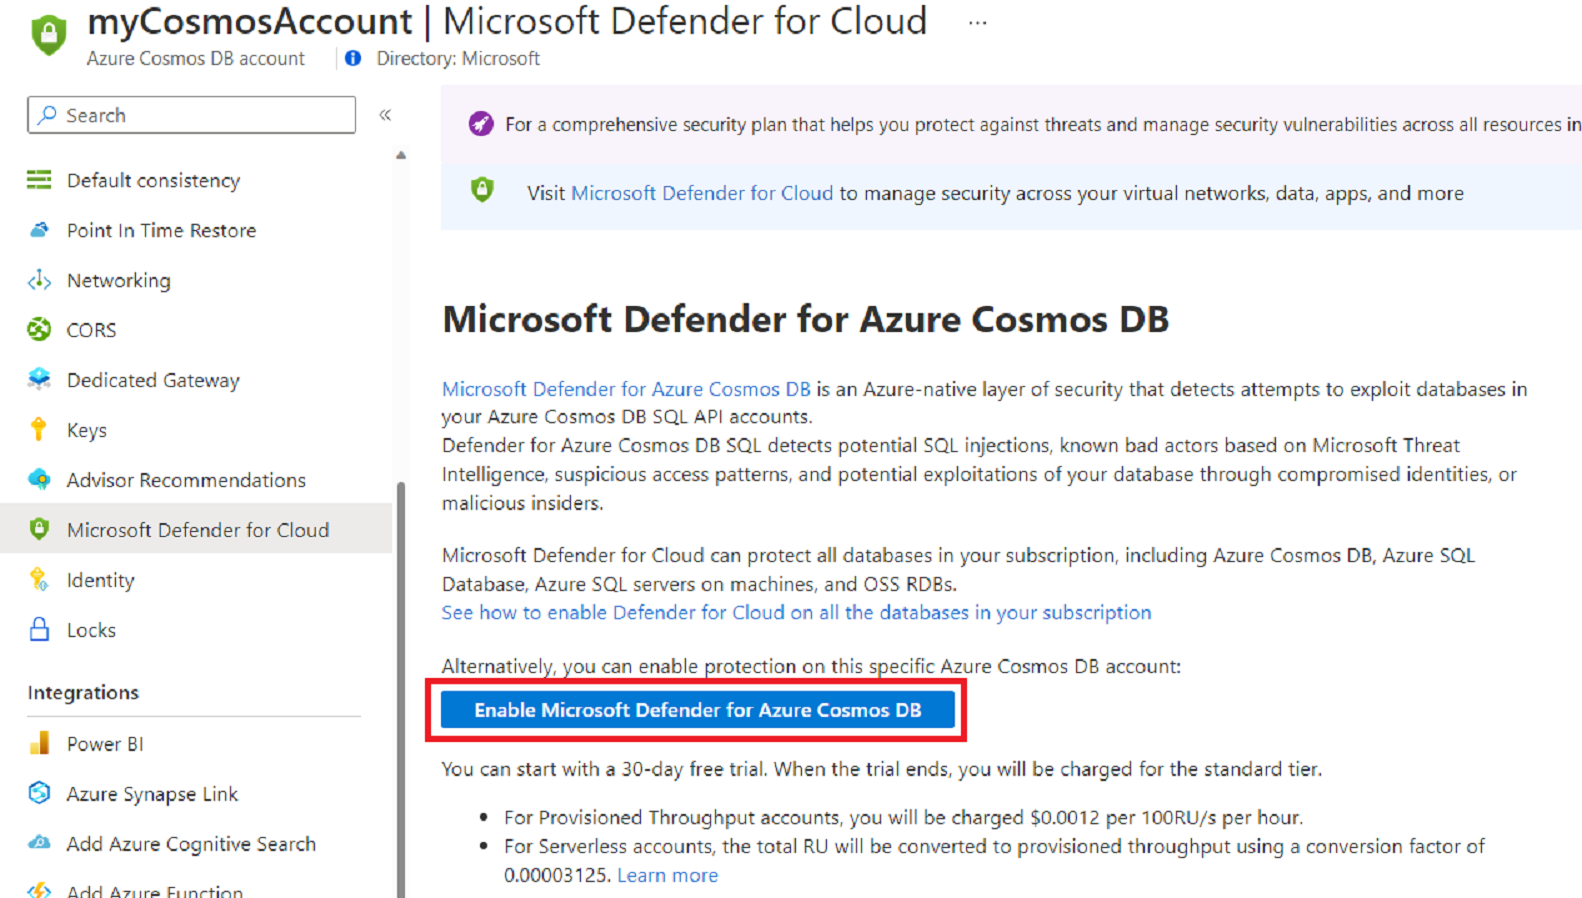 Screenshot of the option to enable Microsoft Defender for Azure Cosmos DB on your specified Azure Cosmos DB account.